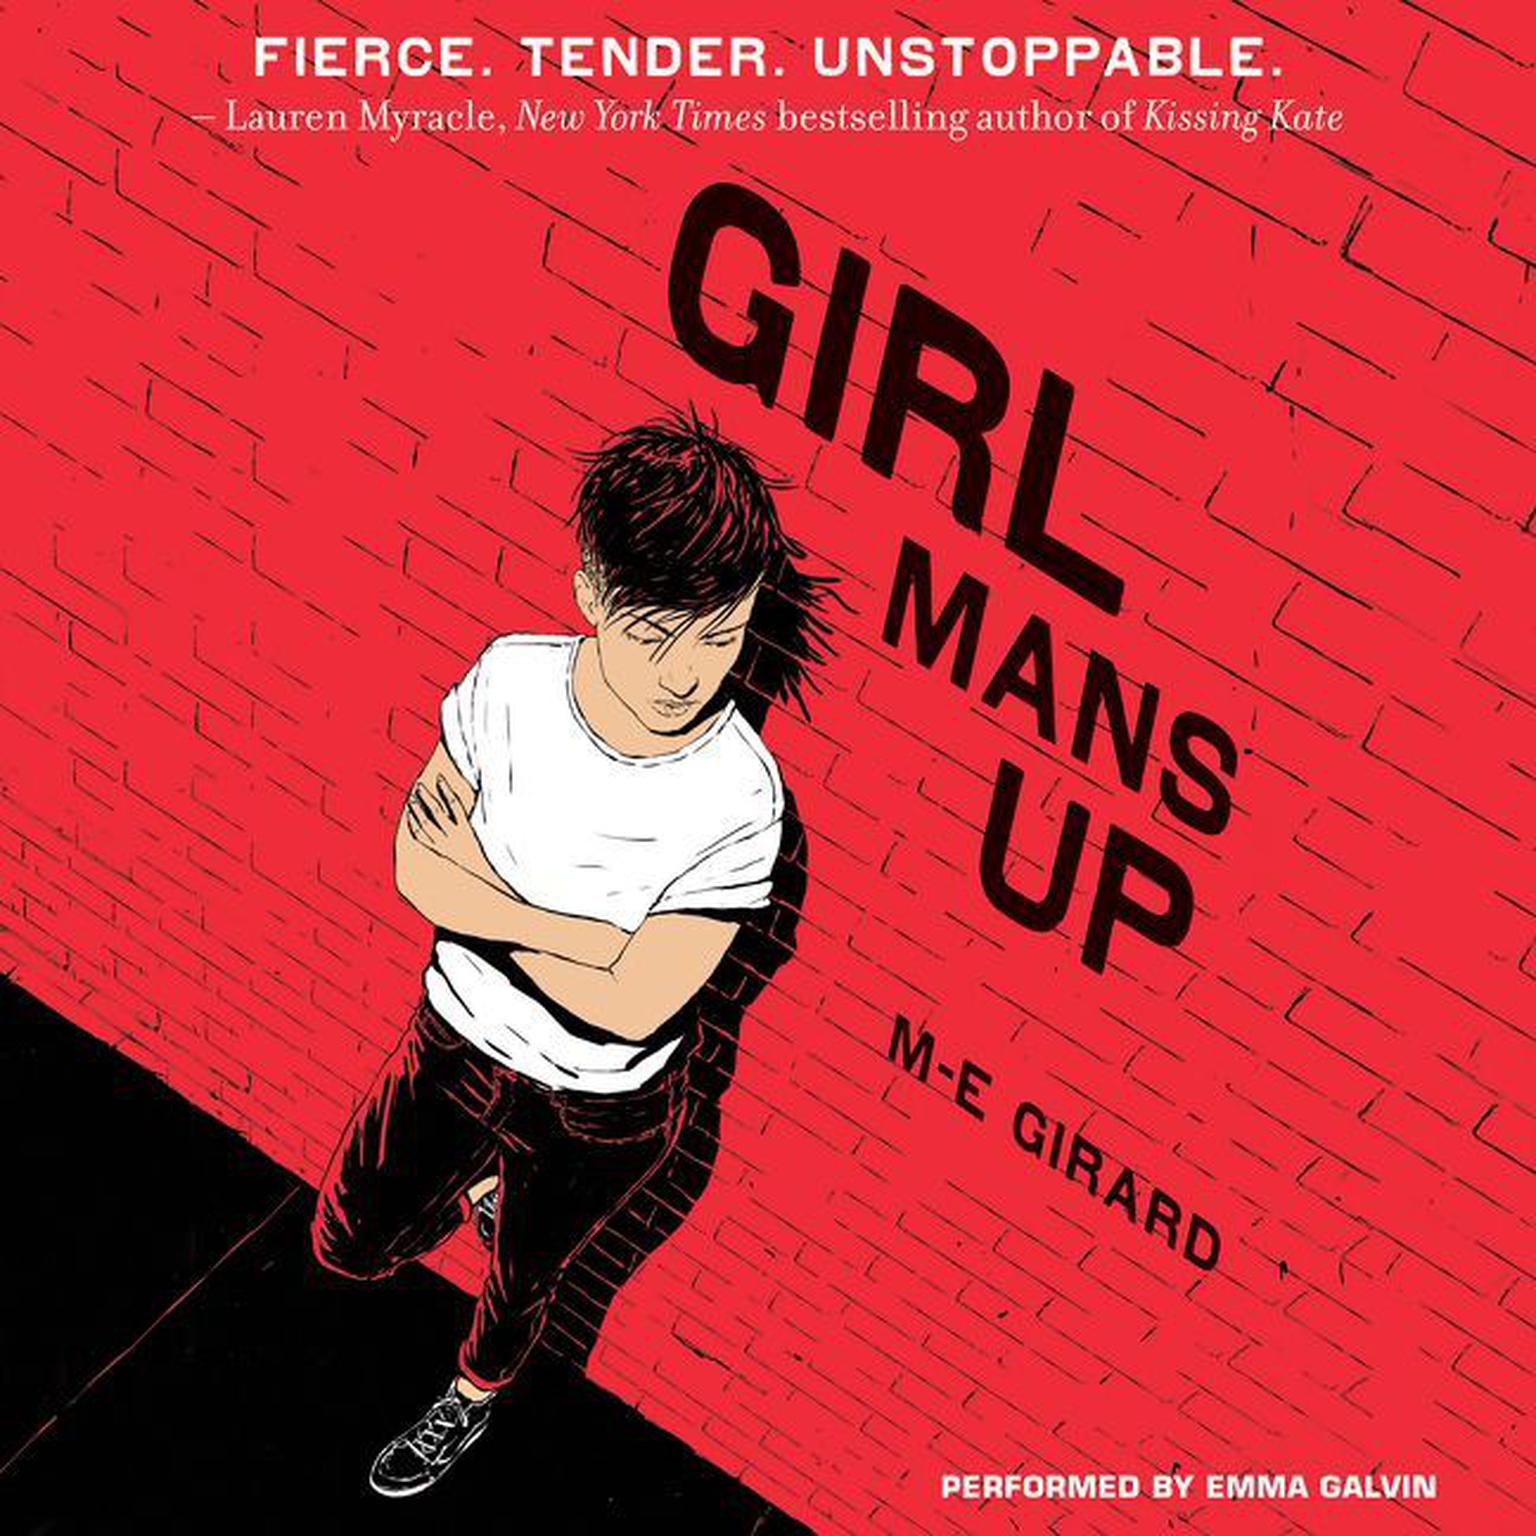 Girl Mans Up Audiobook, by M-E Girard